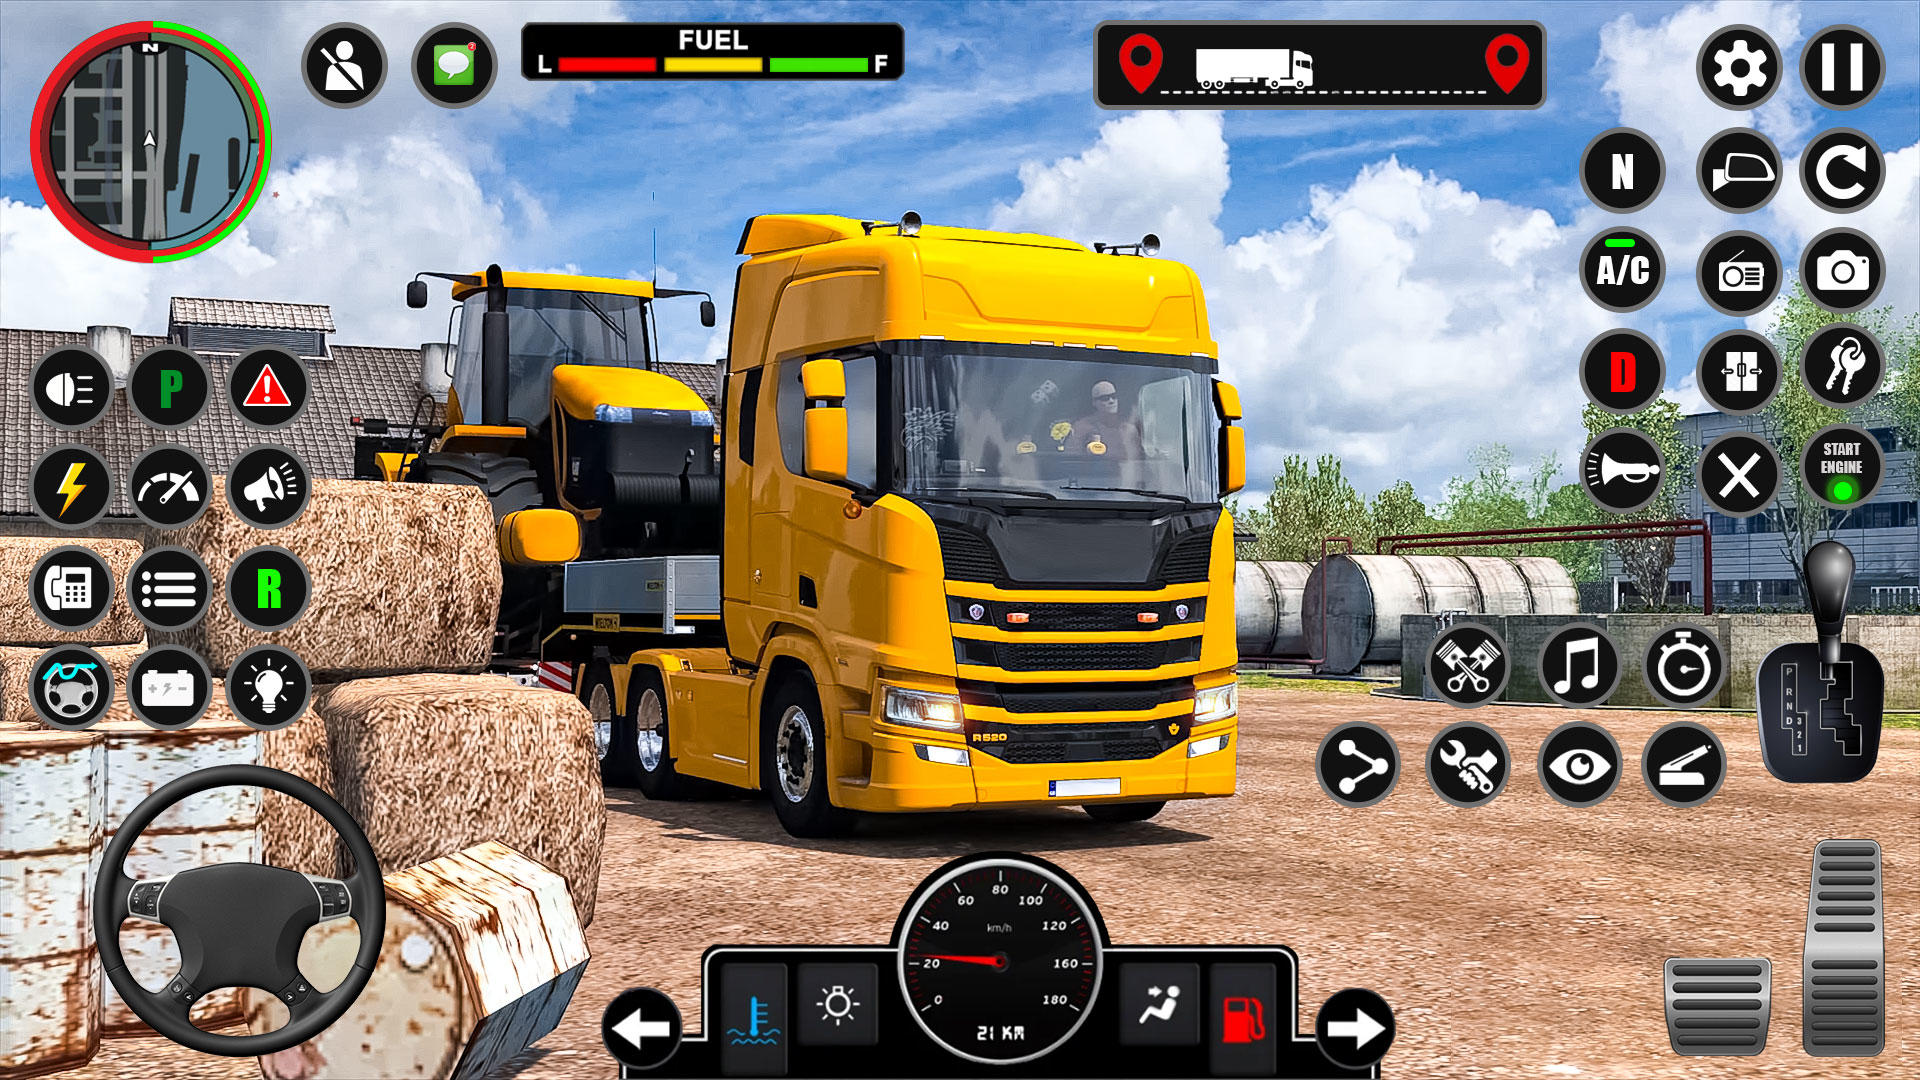 Euro Truck Driving Sim 3D Game for Android - Download